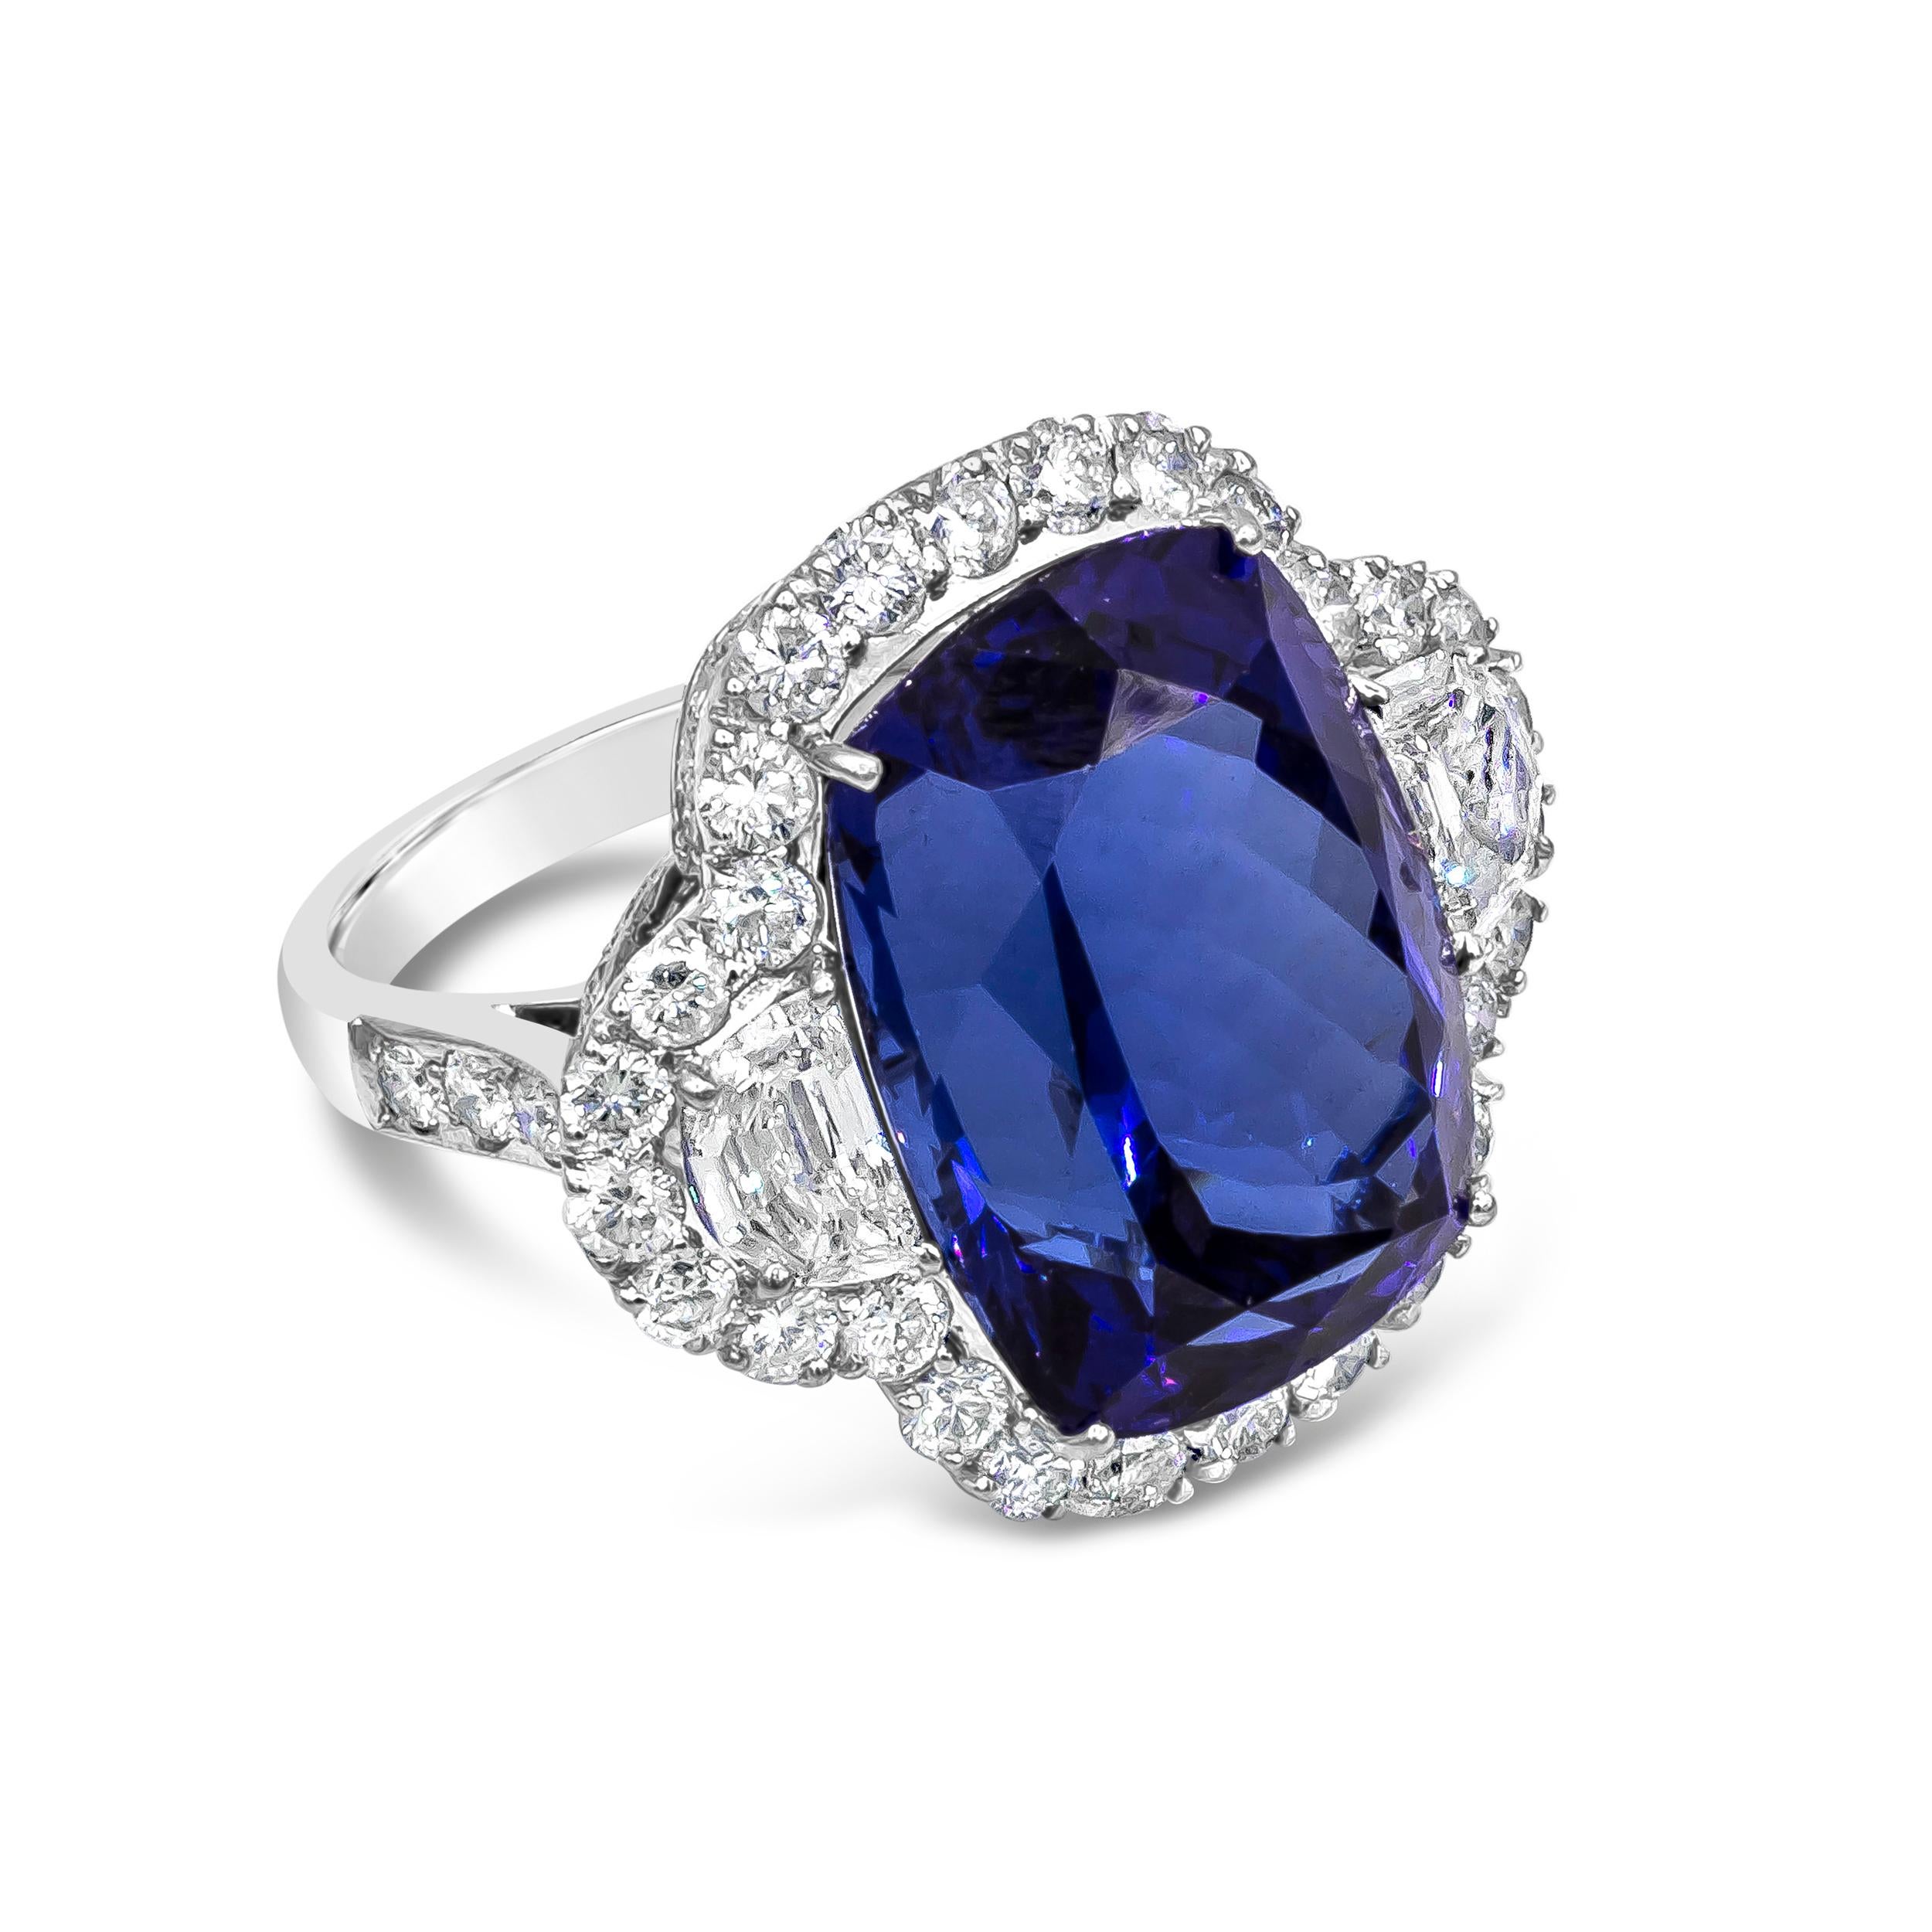 A stunning ring showcasing a rich blue cushion cut tanzanite weighing 26.35 carats. Flanking the center stone are two half-moon diamonds, framed in a brilliant diamond halo. Diamonds weigh 4.52 carats total. Made in 18 karat white gold.

